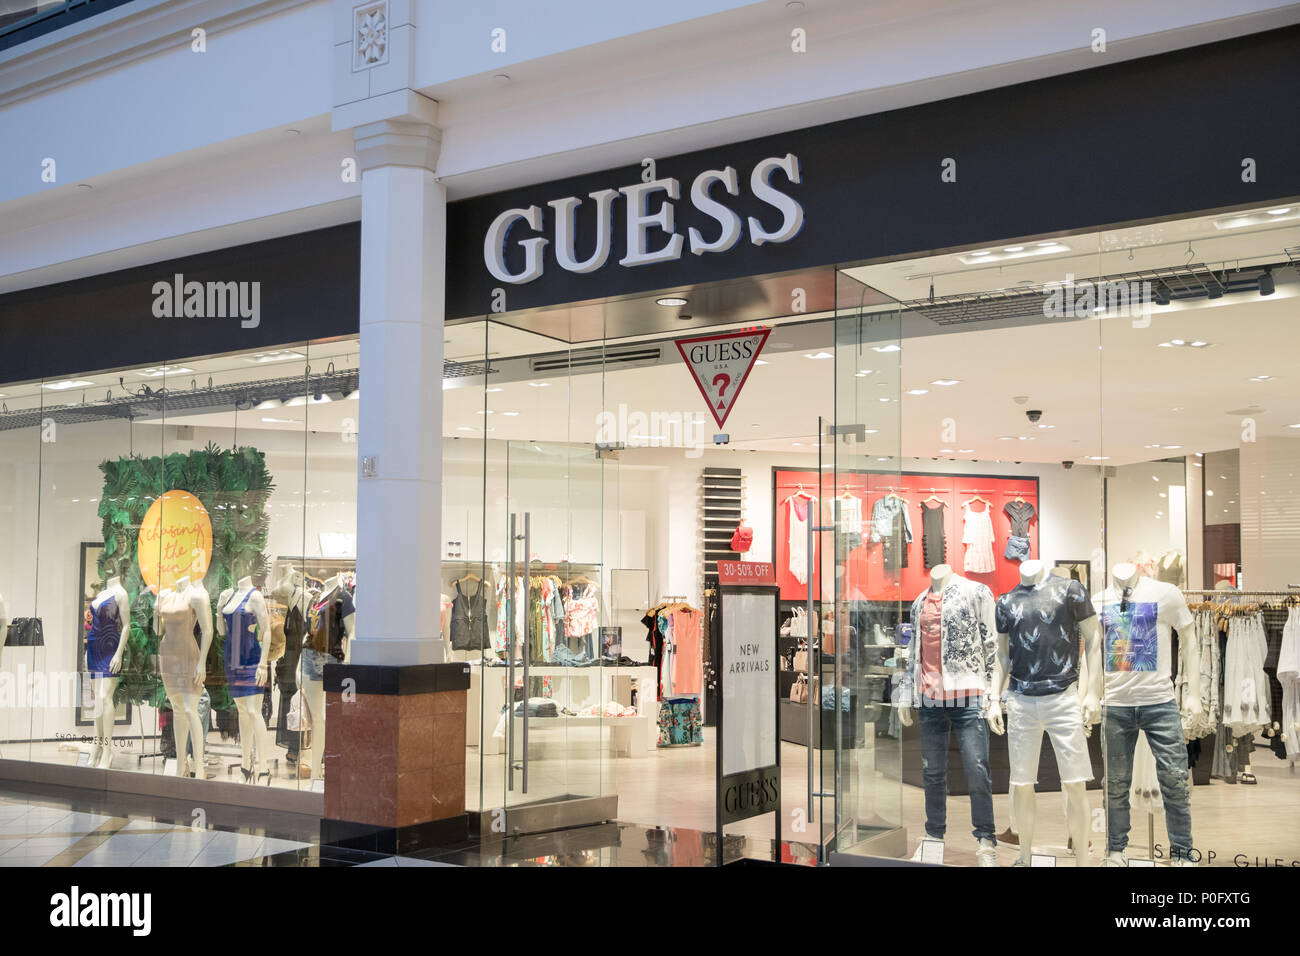 Guess Clothing Shop Interior High Resolution Stock Photography and Images -  Alamy